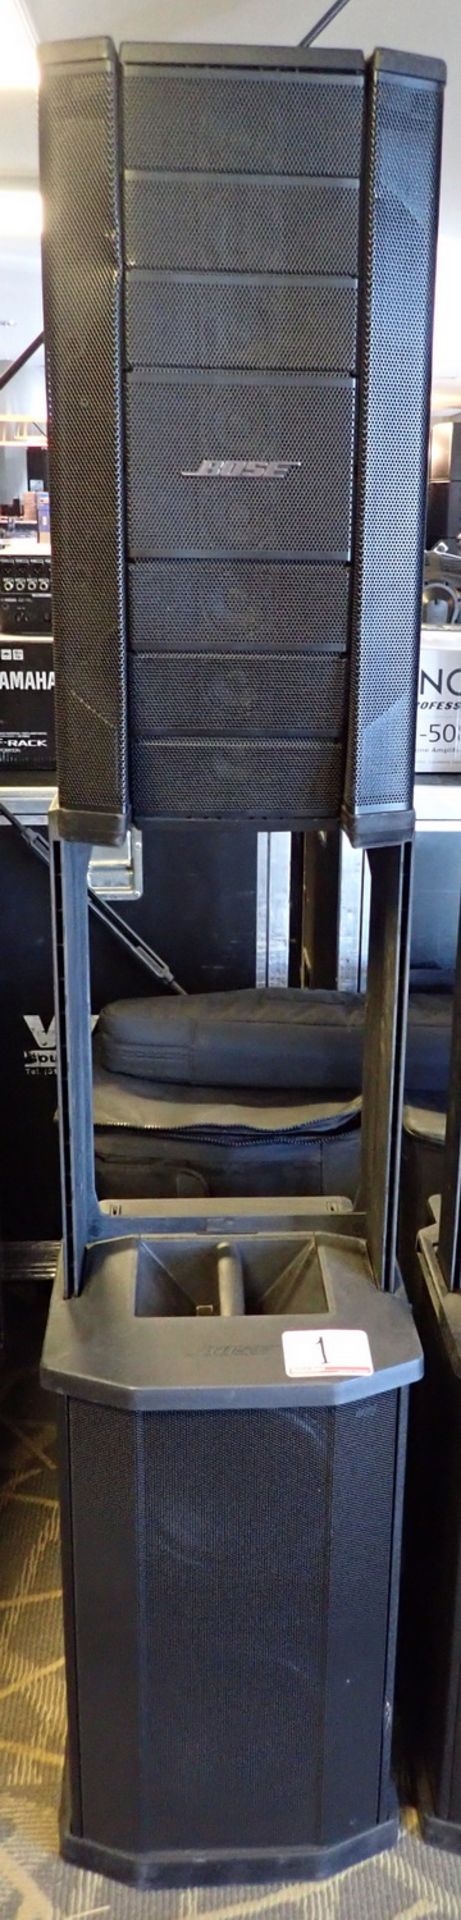 LOT - BOSE F1 812 FLEXIBLE ARRAY C/W F1 SUBWOOFER, STAND, & TRAVEL SOFT CASE